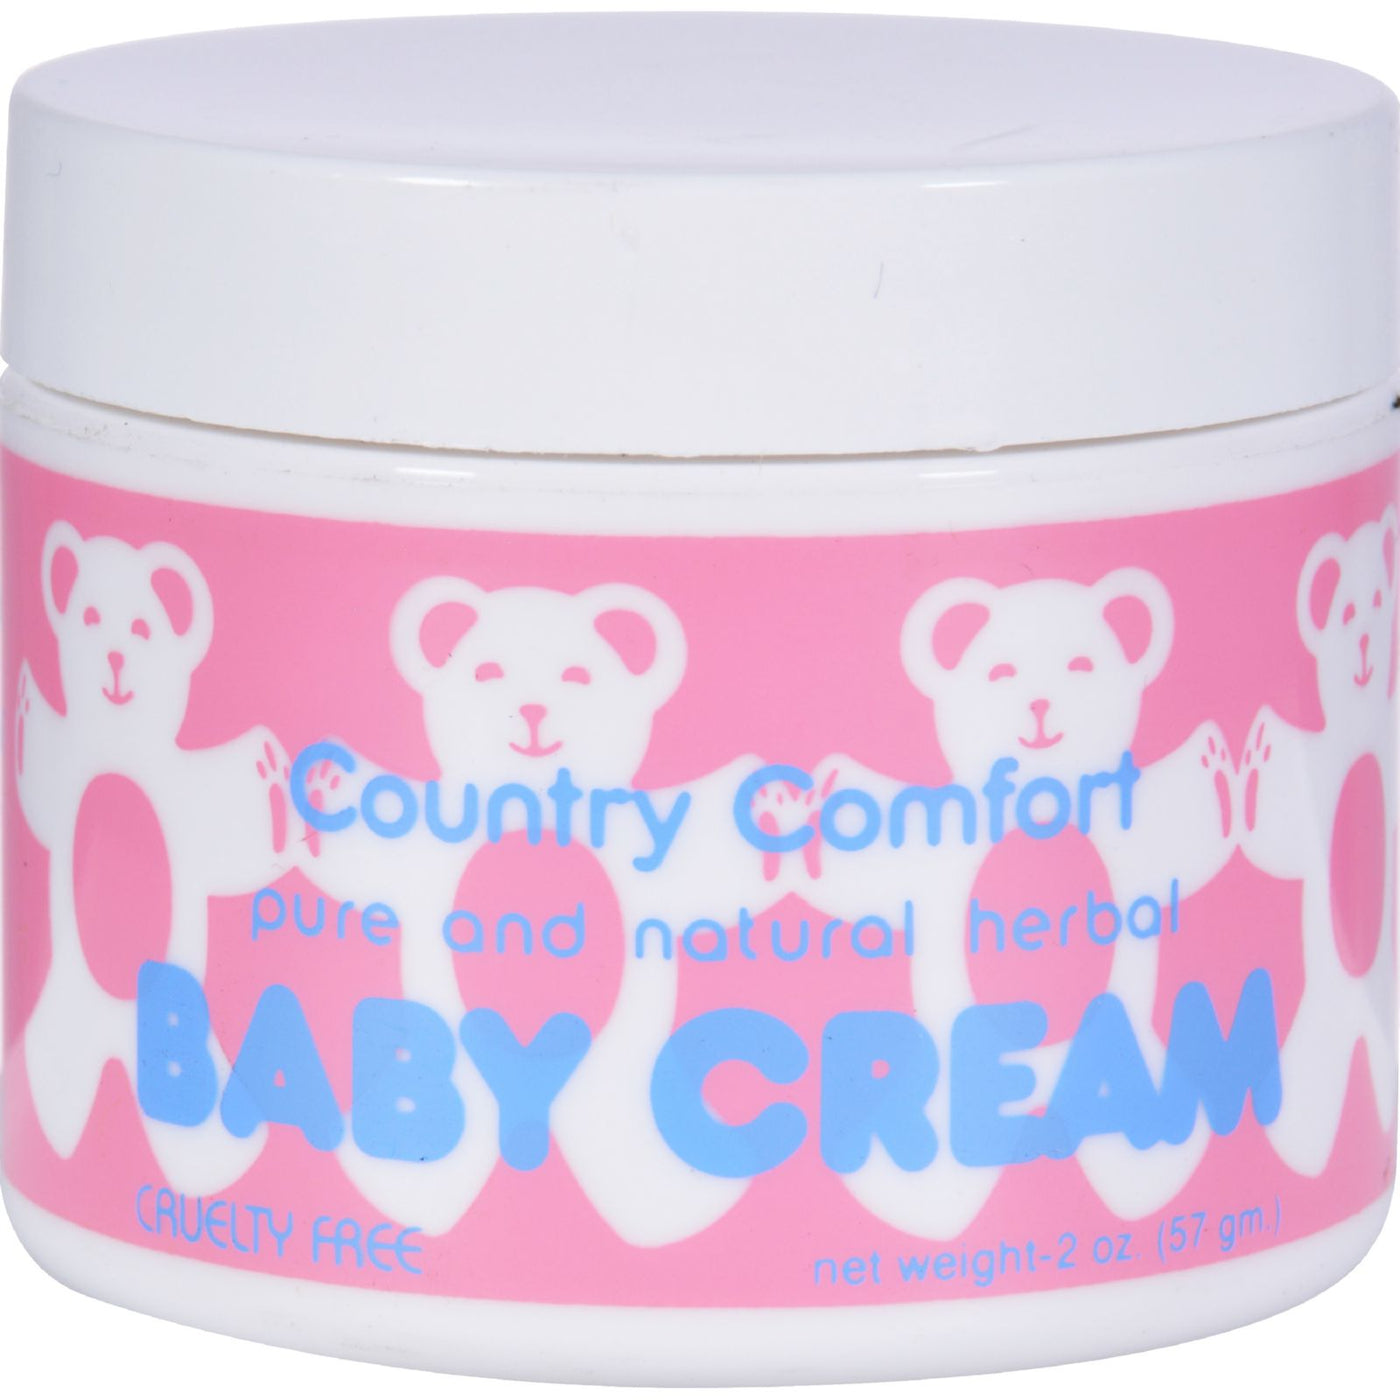 Country Comfort Baby Cream - 2 Oz | OnlyNaturals.us